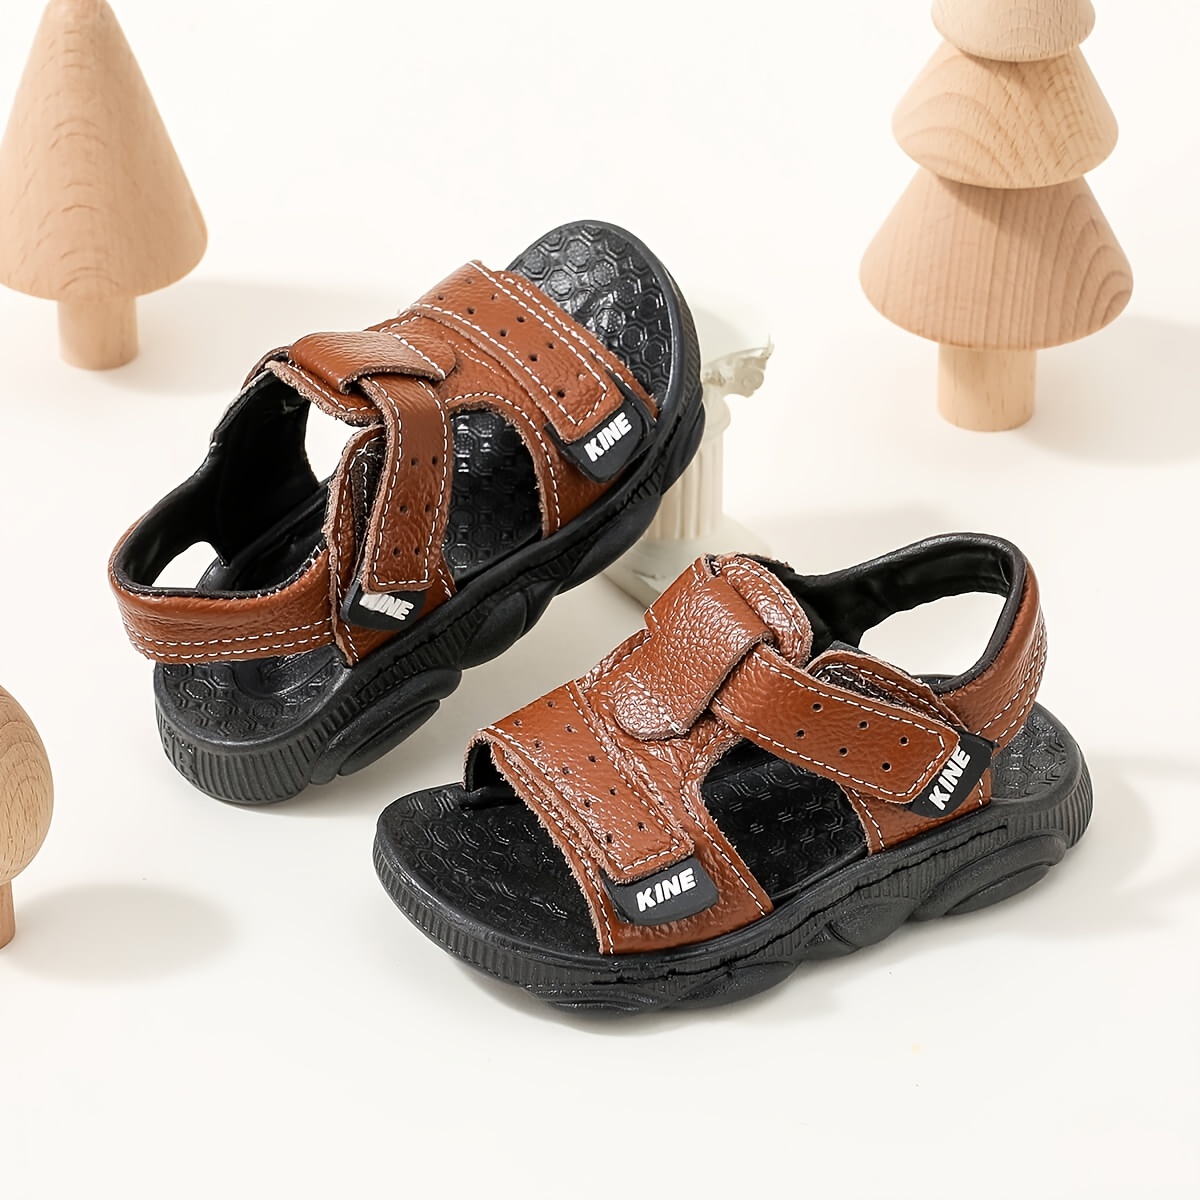 Boys Casual Trendy Sandals, Non-slip Soft Sole Breathable Hook And Loop  Fastener Sandals For Summer Holiday Beach Party, Shop Now For Limited-time  Deals